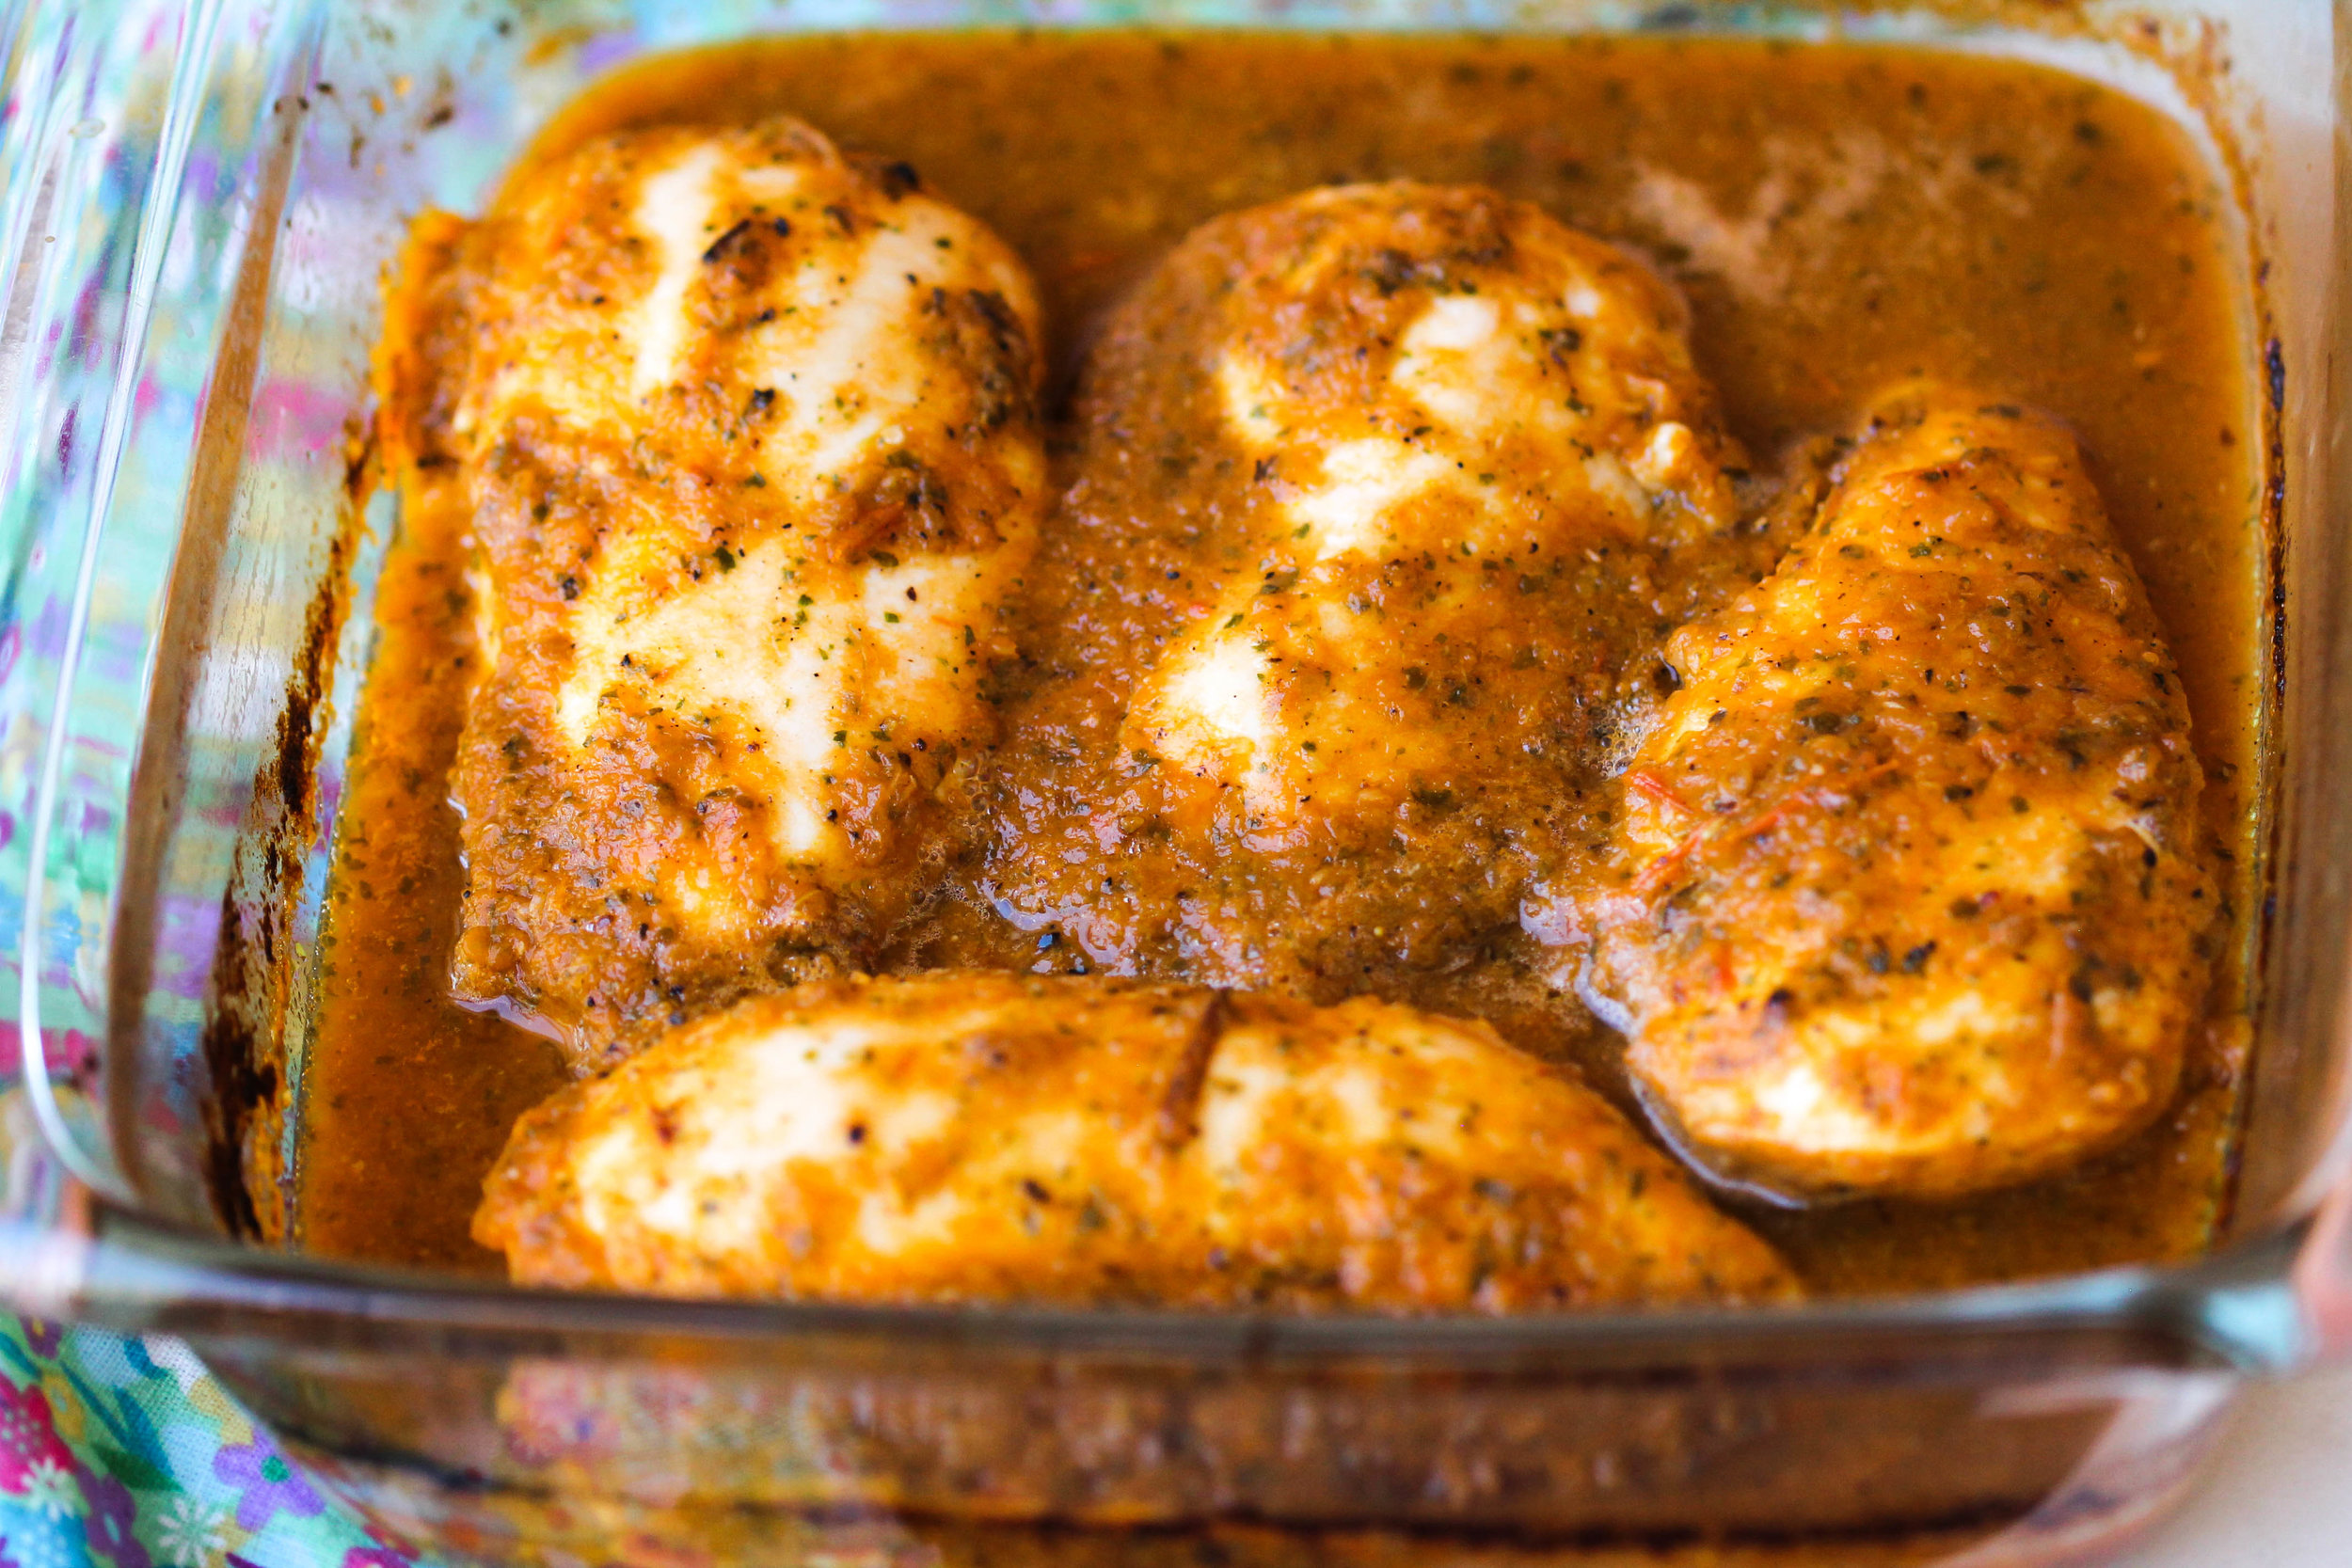 Salsa Chicken requires just 2 ingredients and a pan to get juicy, delicious chicken in less than an hour!